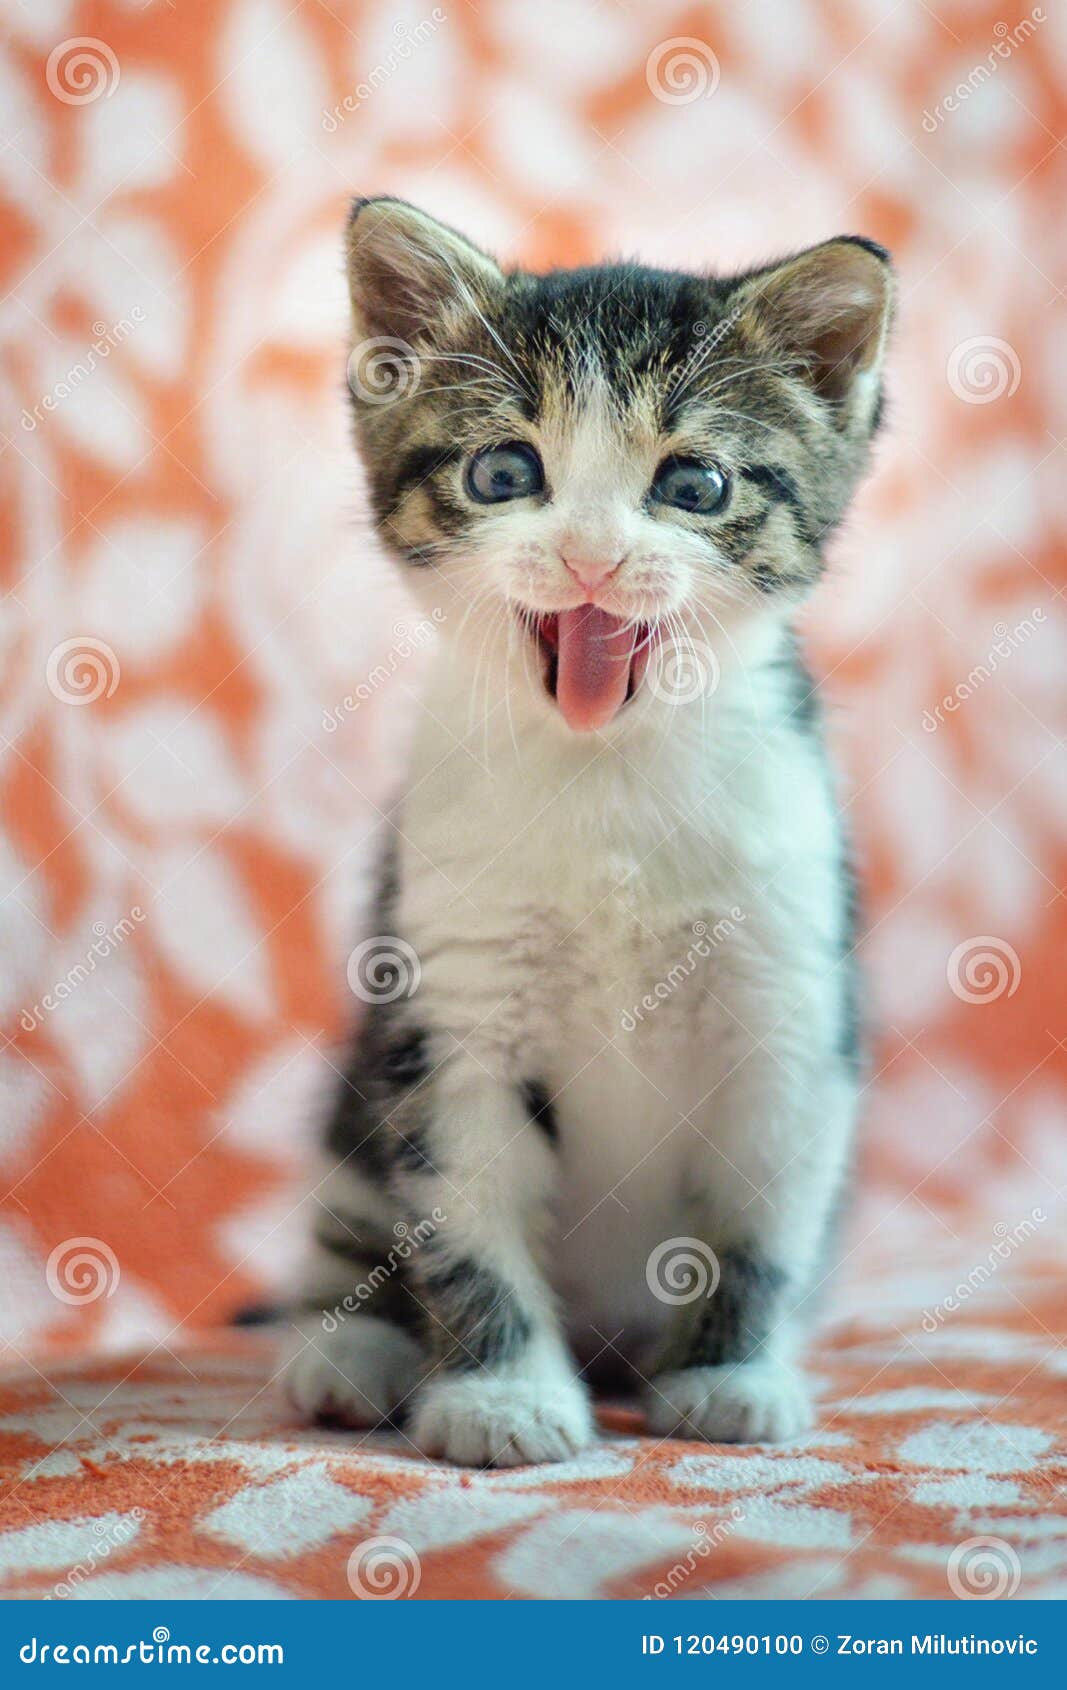 Cute Kitten Sticking His Tongue Out Stock Photo - Image of felines ...